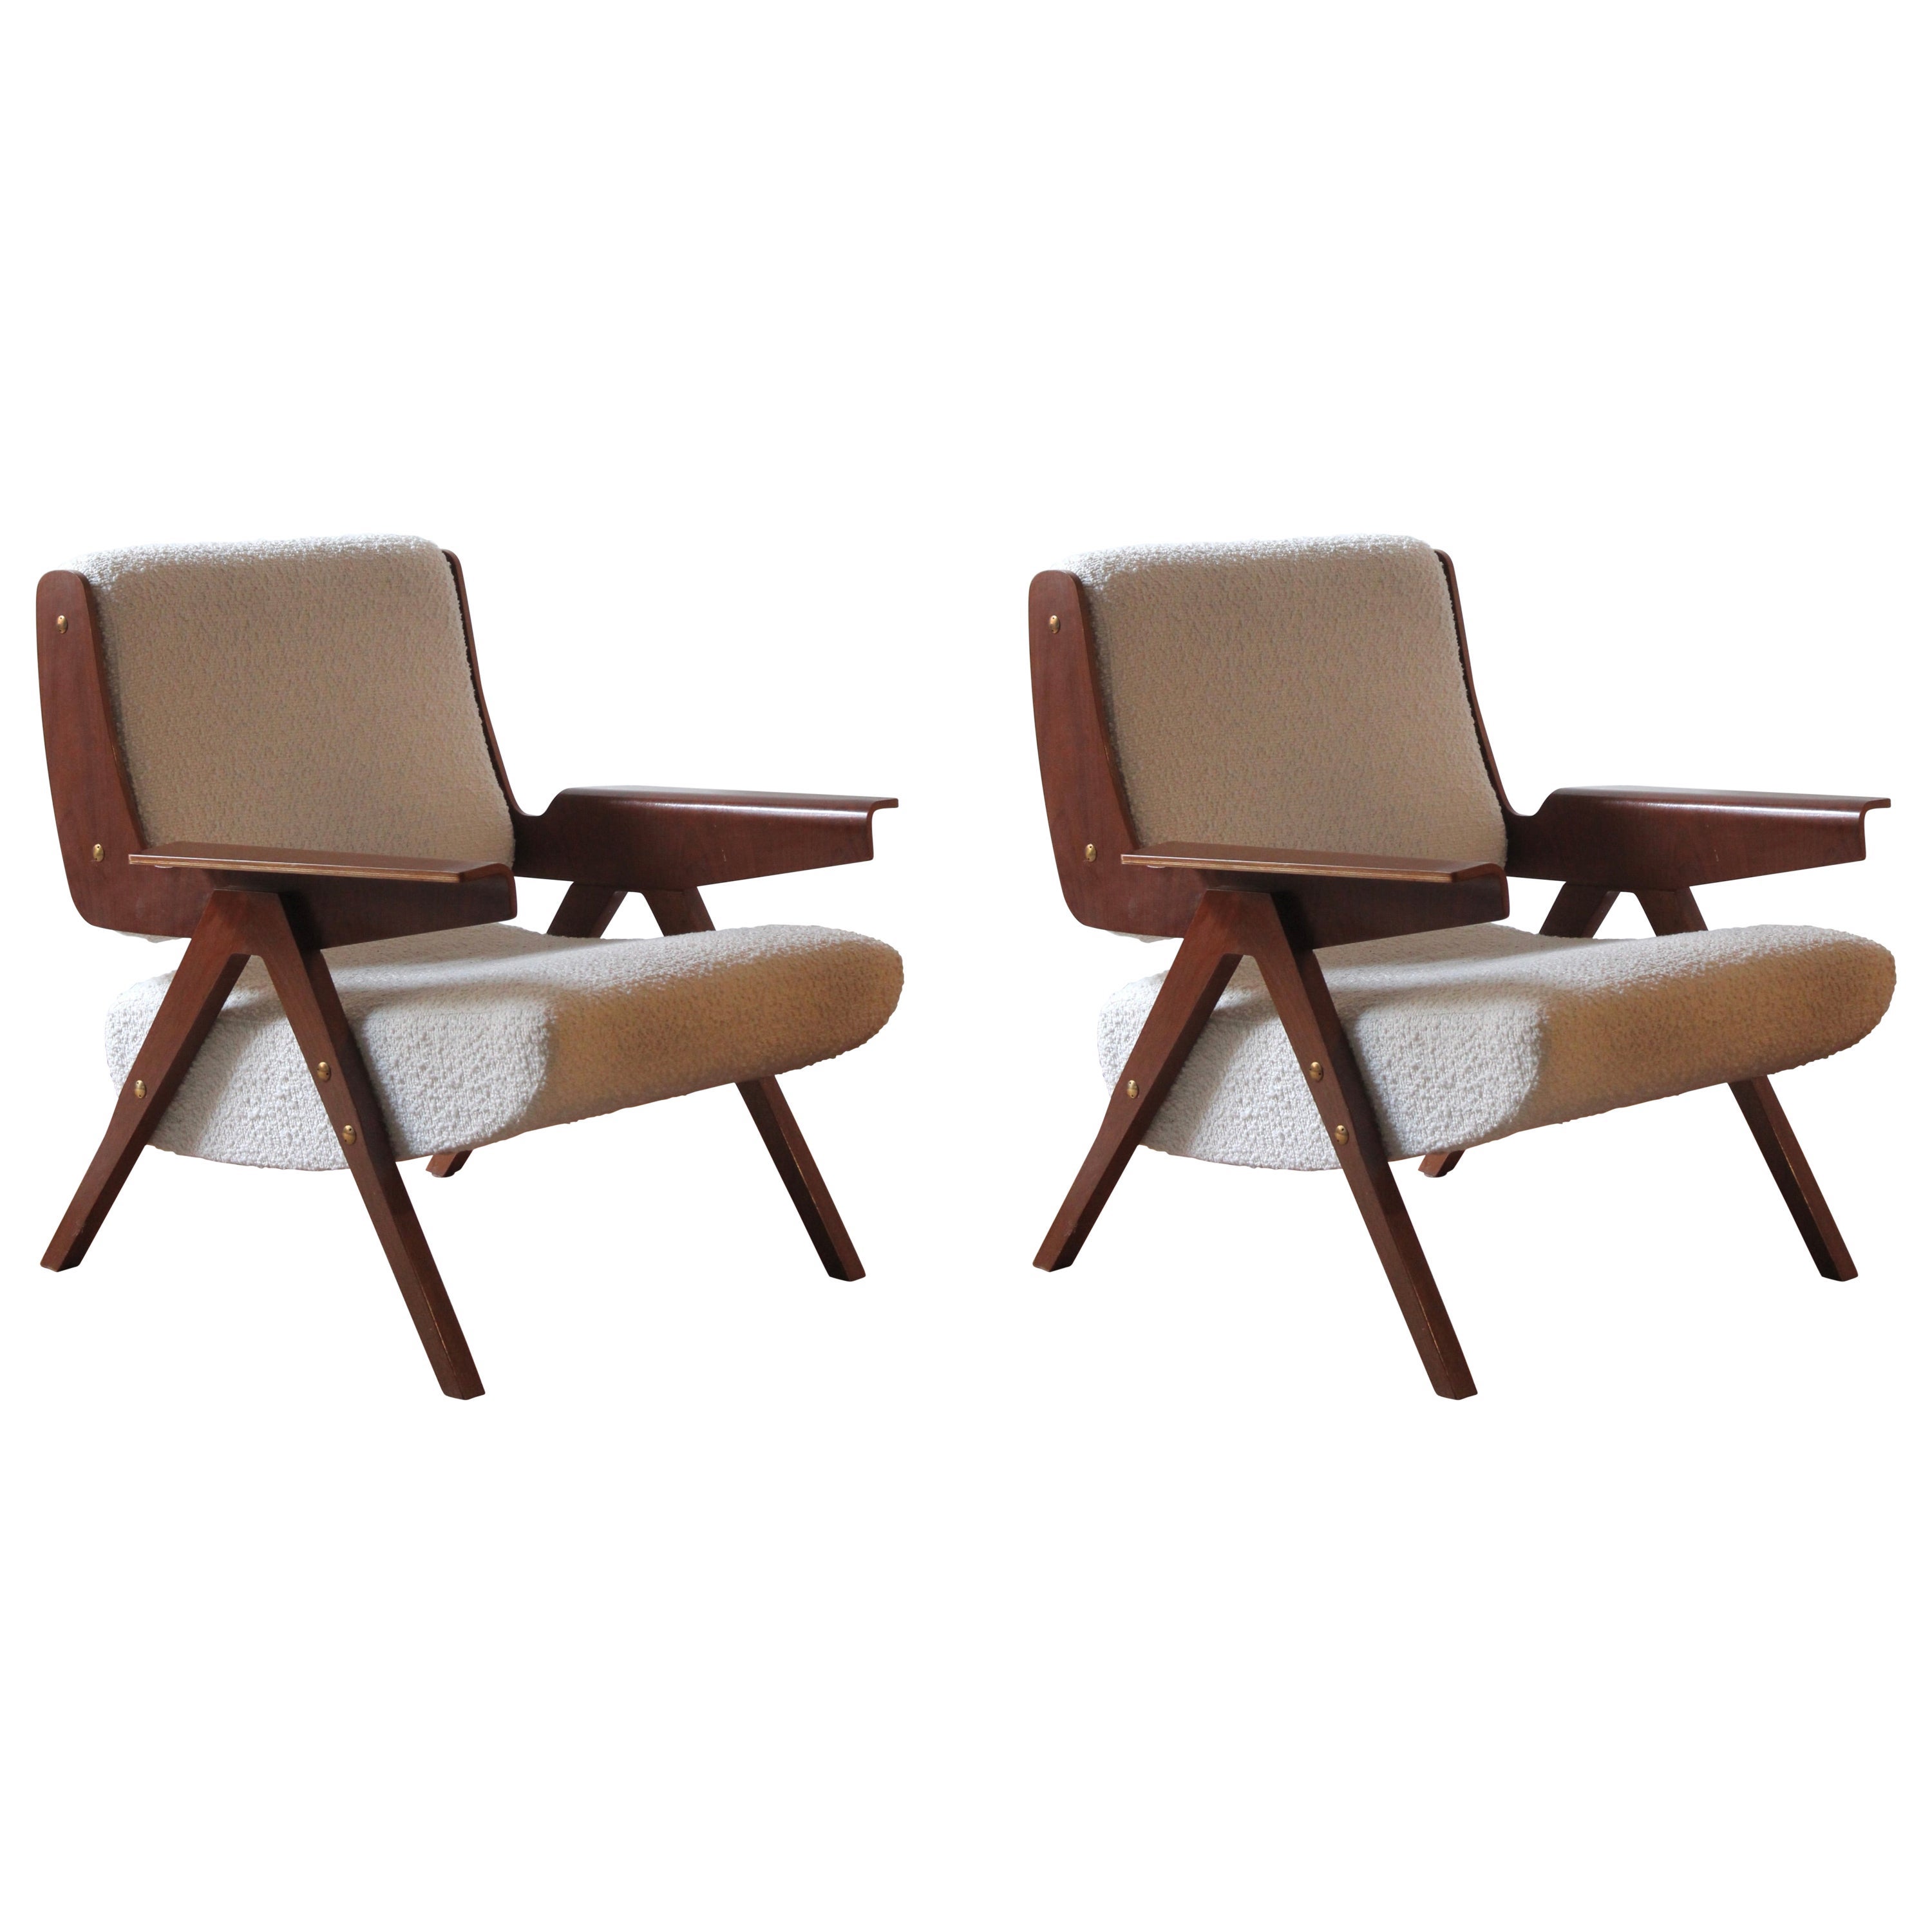 Gianfranco Frattini, Lounge Chairs Plywood, White Fabric, Cassina Italy, C. 1955 For Sale